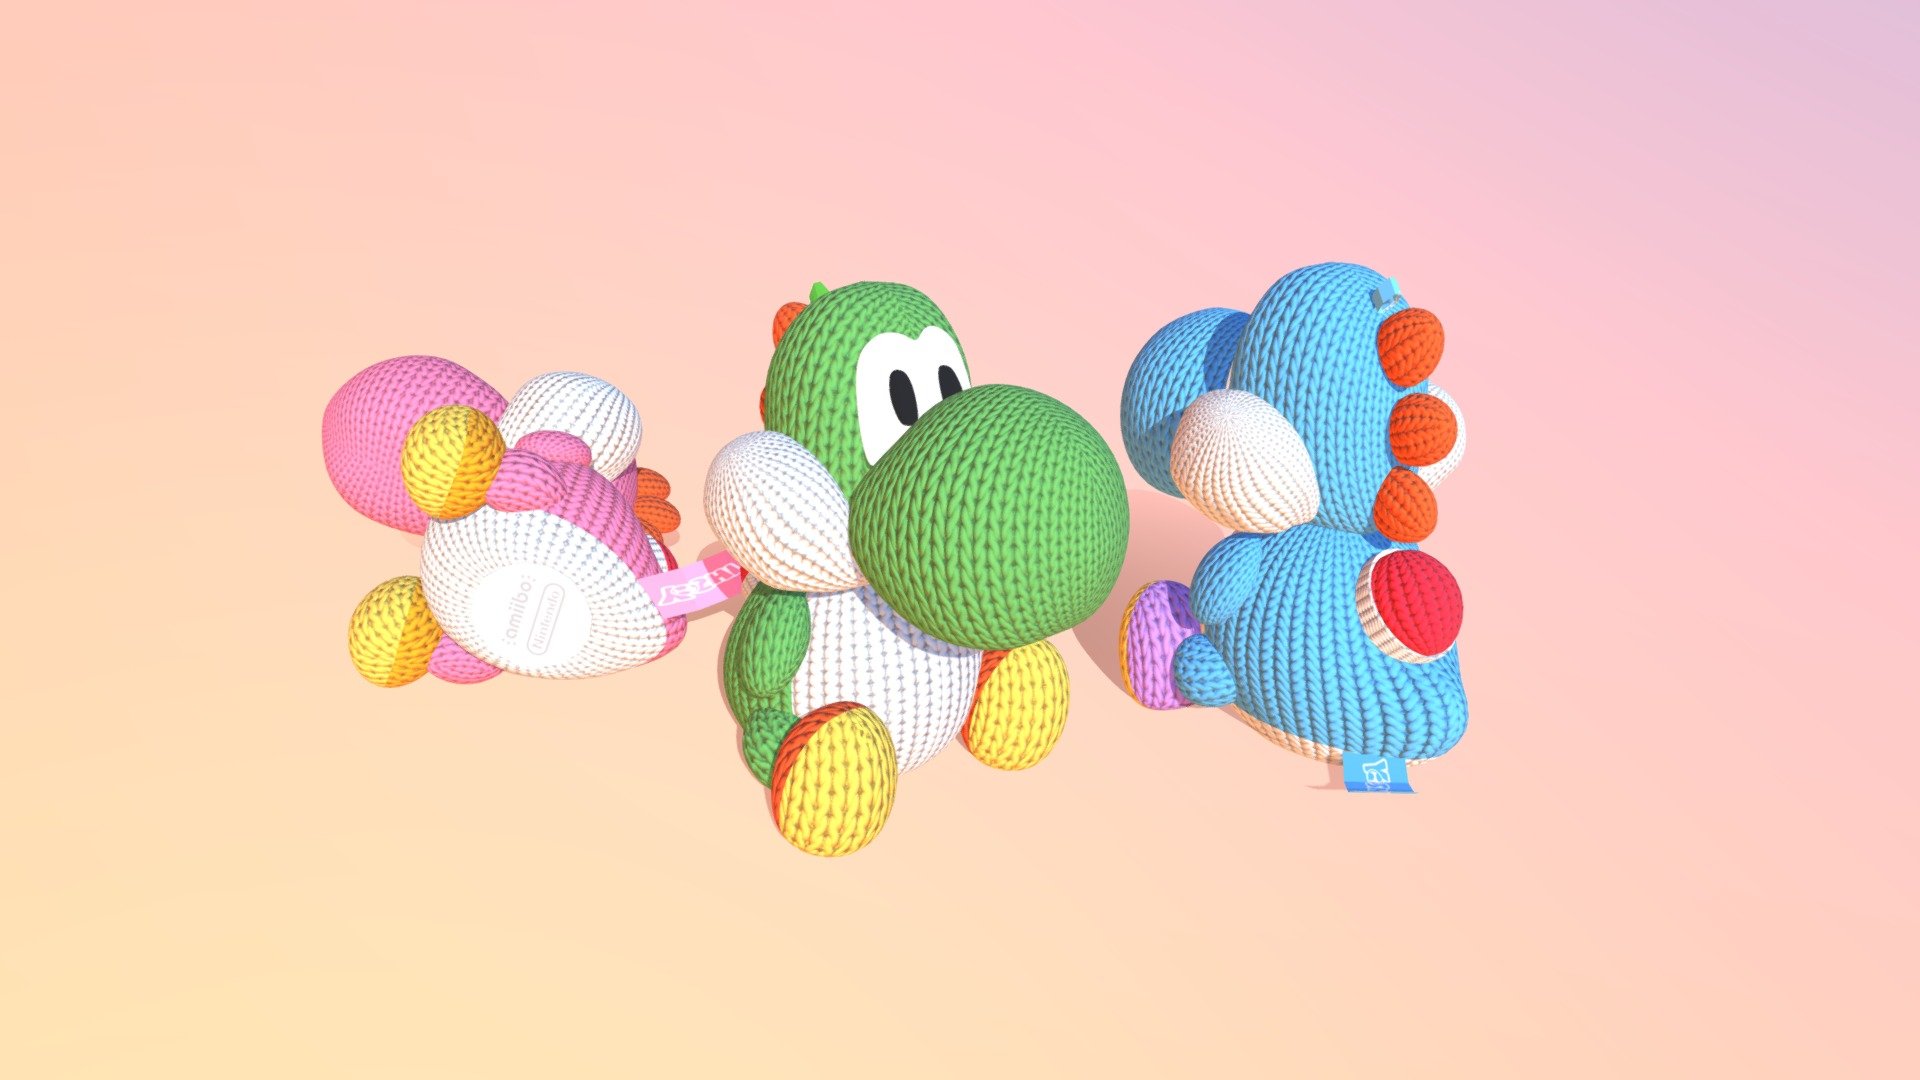 Three yarn yoshi amiibos based on Nintendo's very own! Everything was made using Blender. Which color is your favorite?

Knit wool texture is from Poliigon: https://www.poliigon.com/texture/fabric-modeled-wool-001 - Yarn yoshi amiibos - 3D model by trishakriegel 3d model